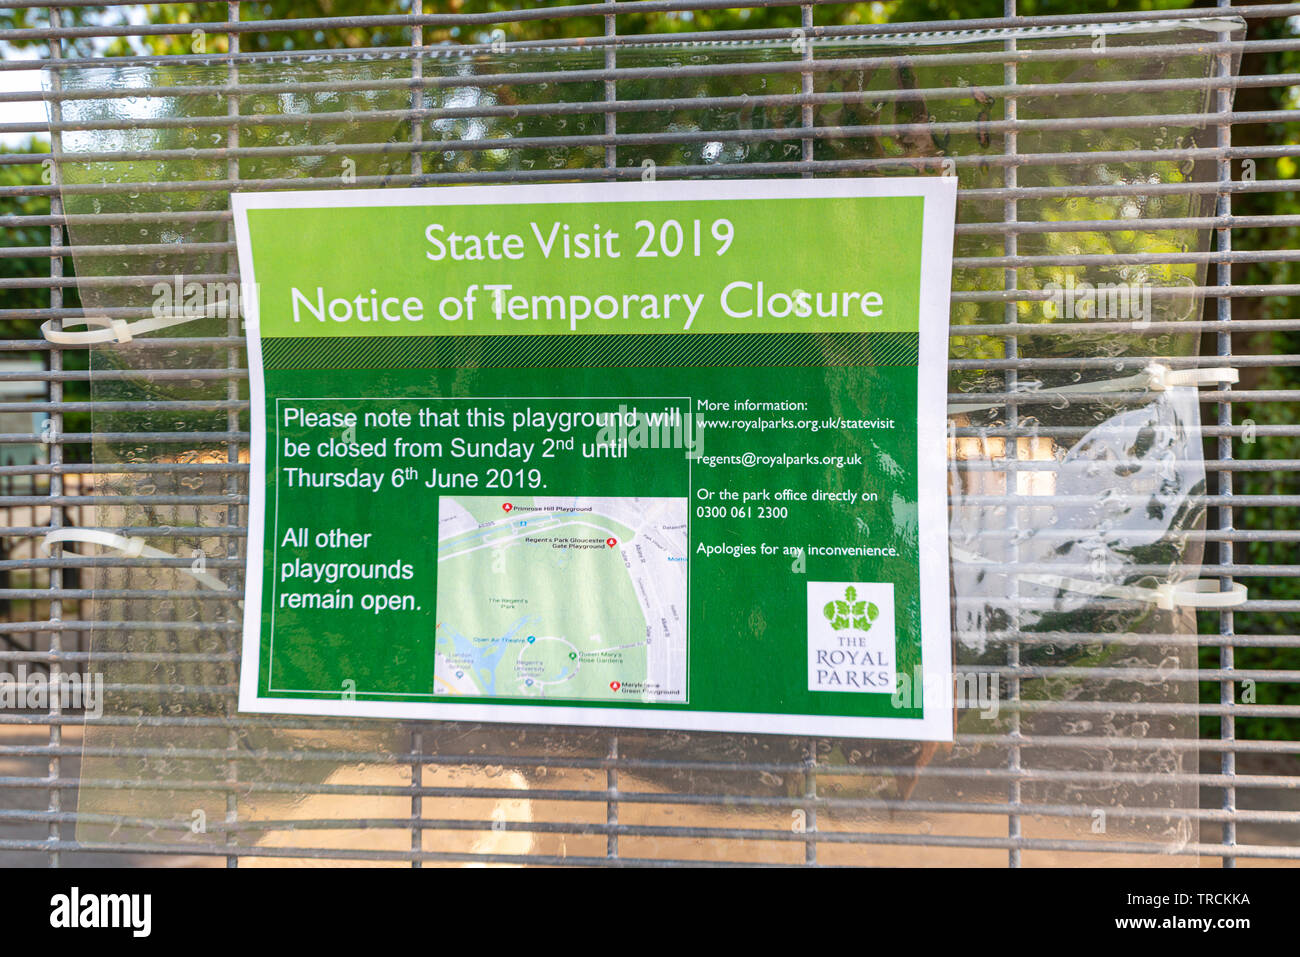 Warning notice on temporary fencing. Security around Winfield House, Regent's Park, London, UK for the State Visit of US President Donald Trump. Stock Photo